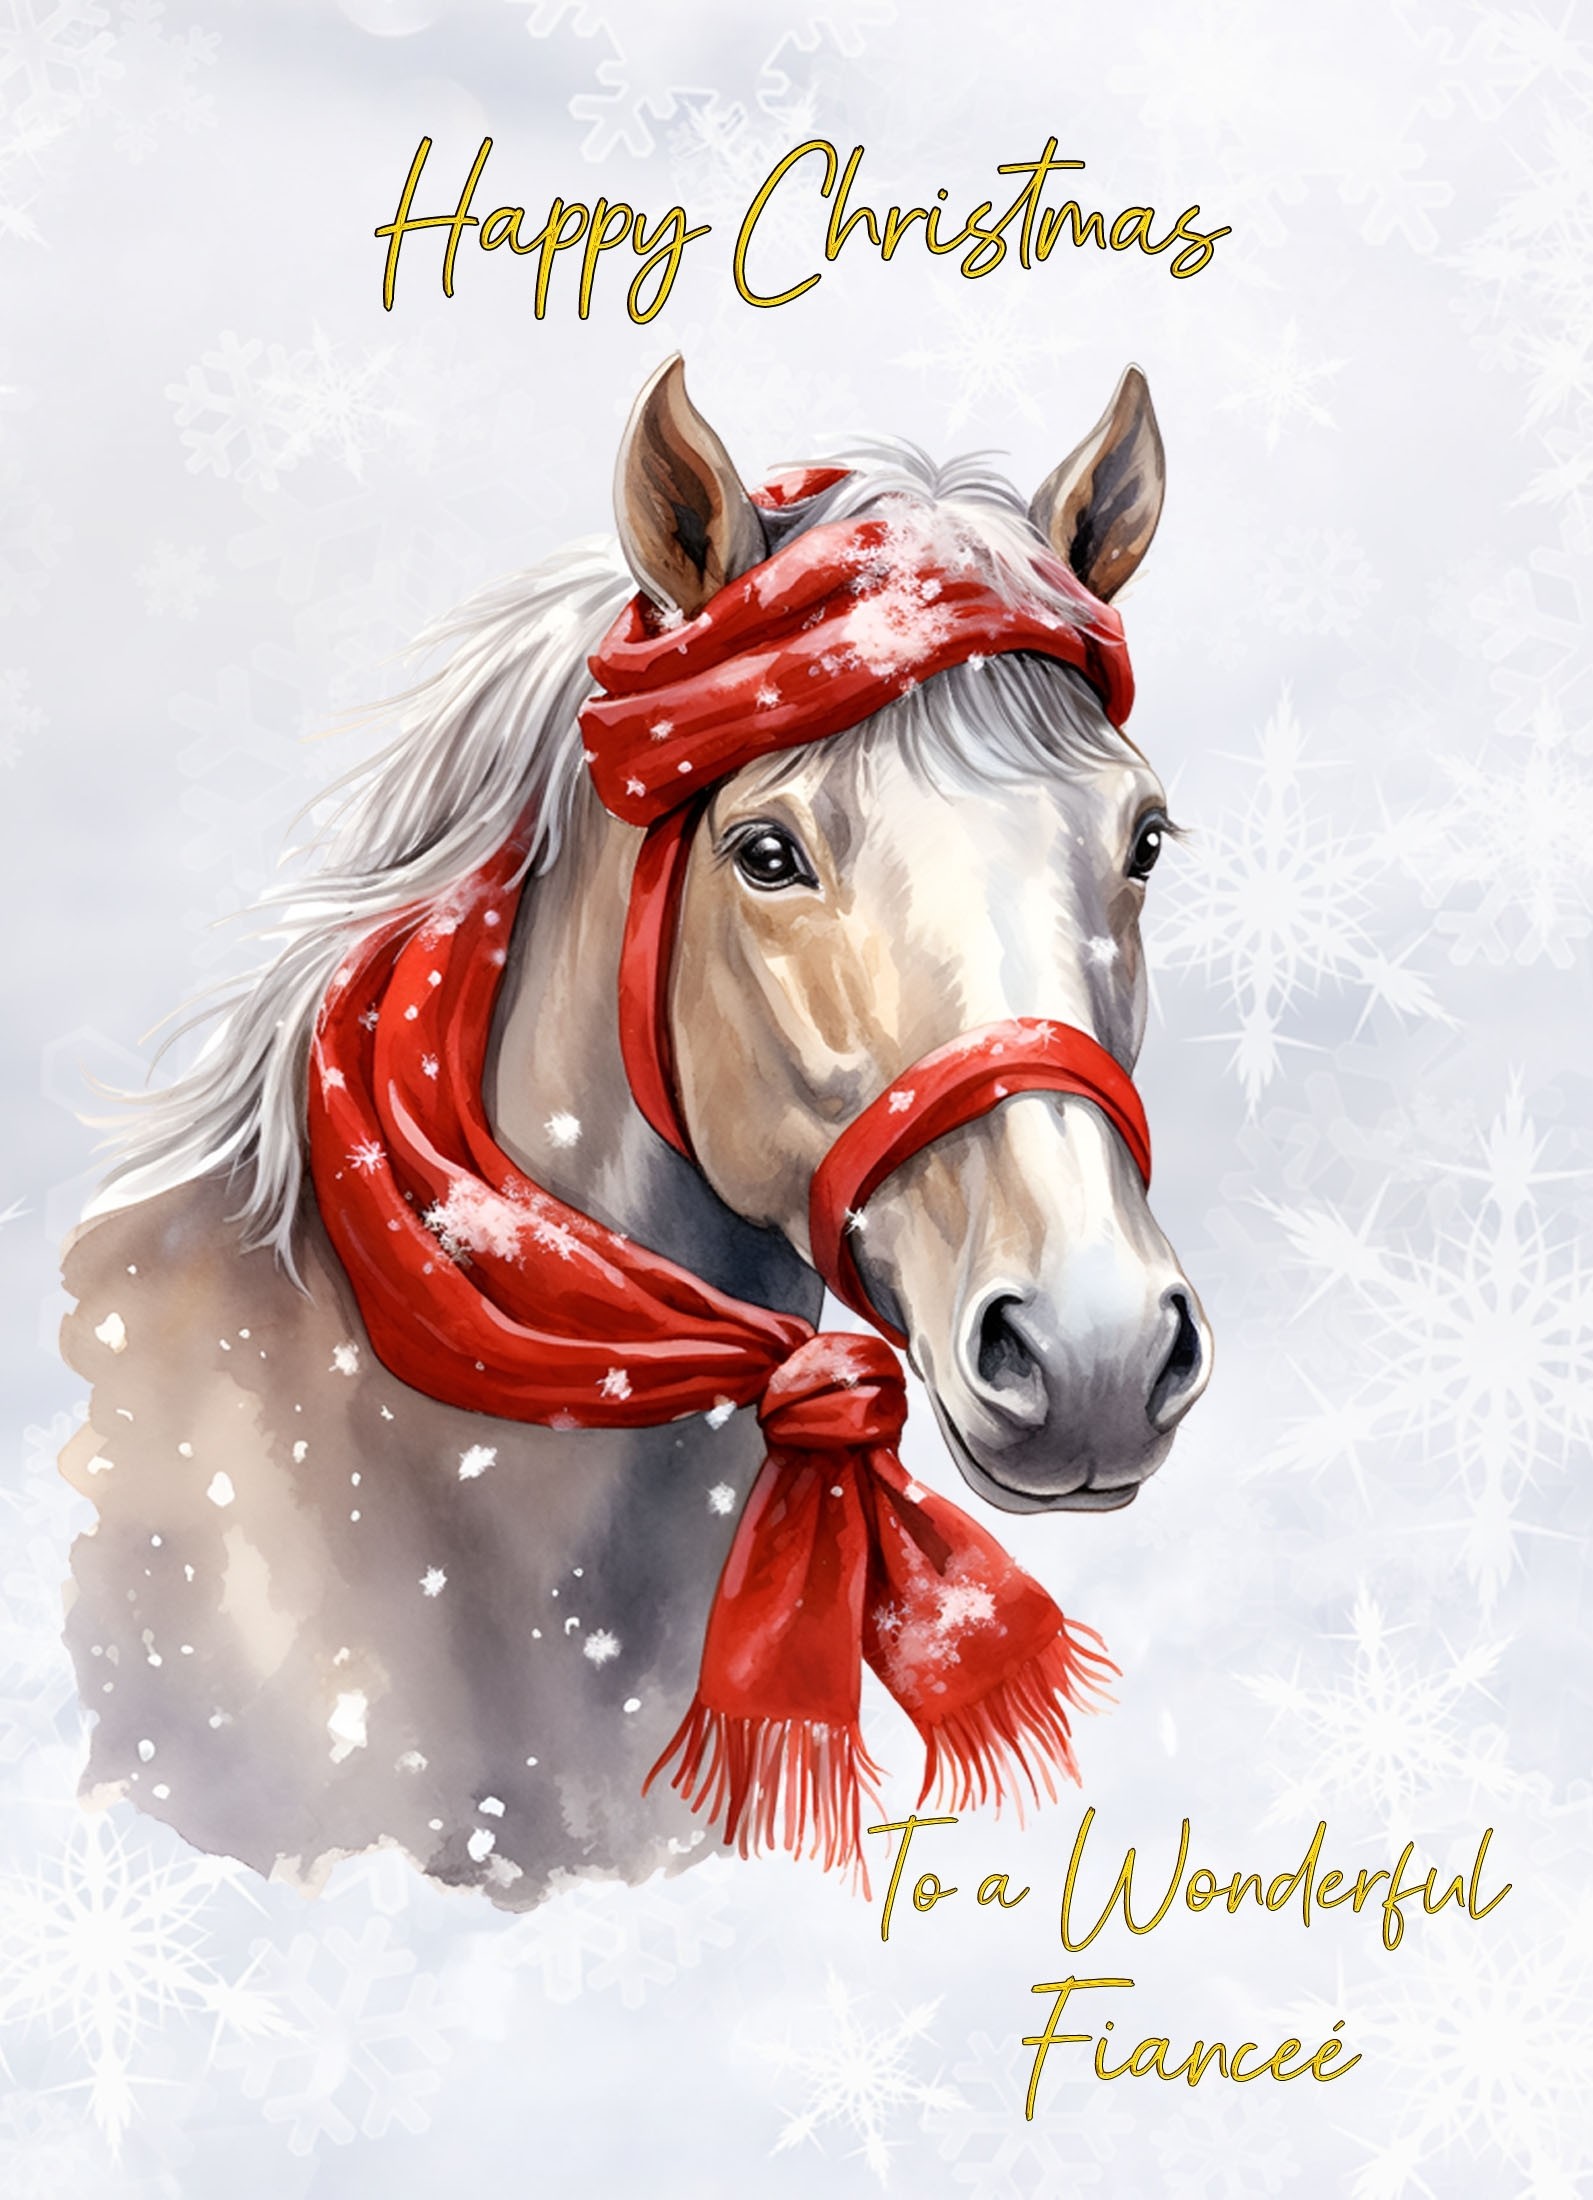 Christmas Card For Fiancee (Horse Art Red)